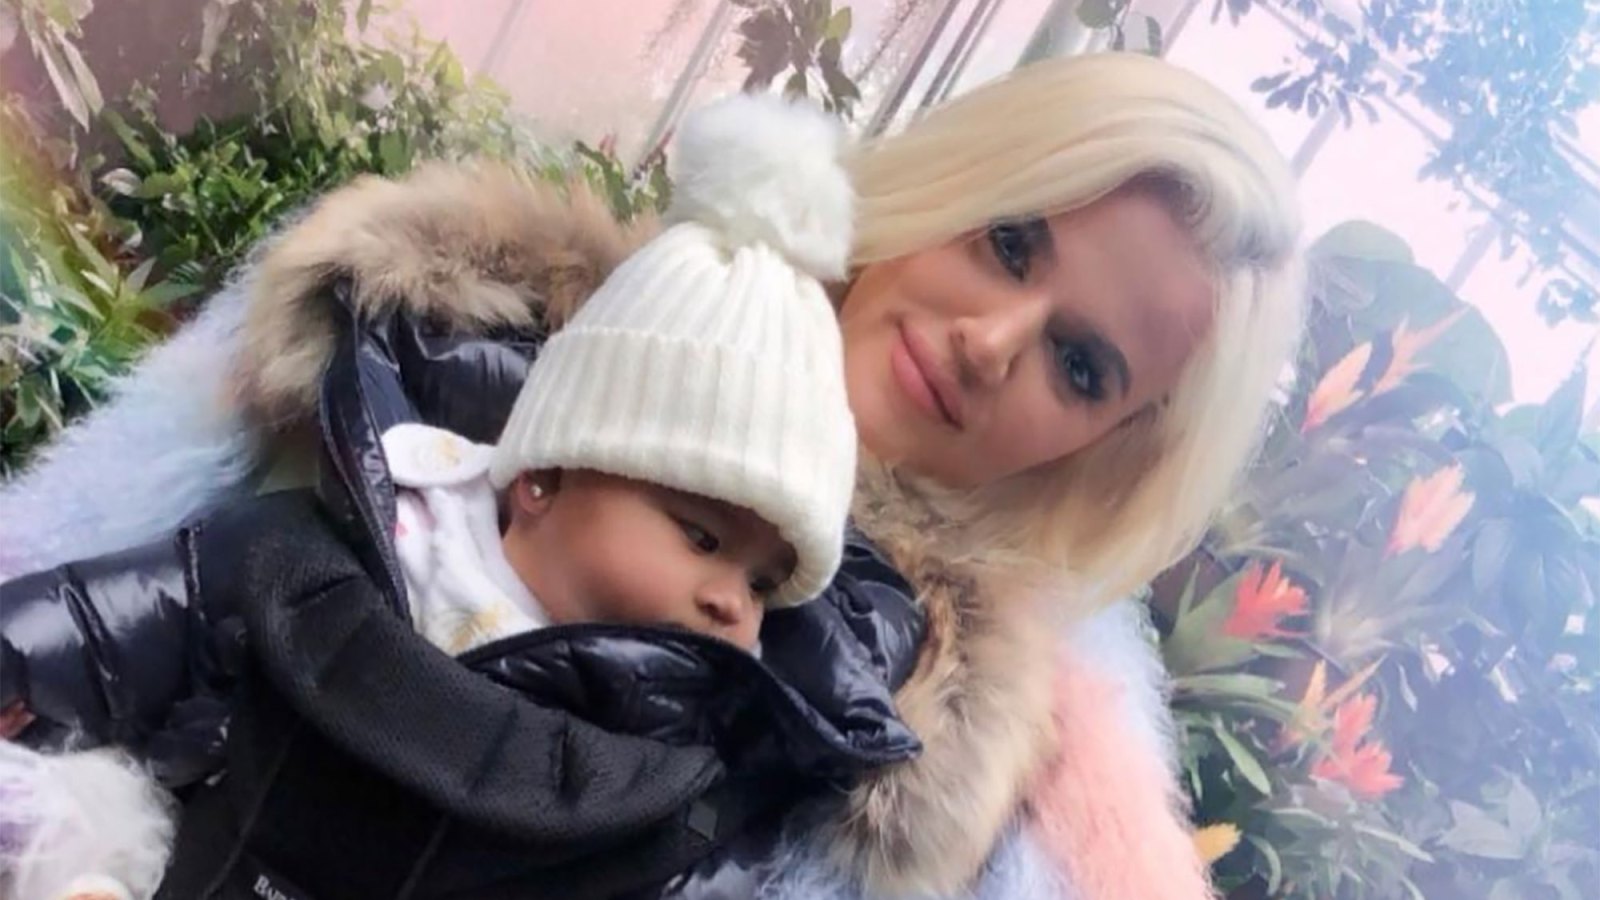 Khloe Kardashian Is Looking for a ‘Sweet Looking Biracial Baby Doll’ for Daughter True